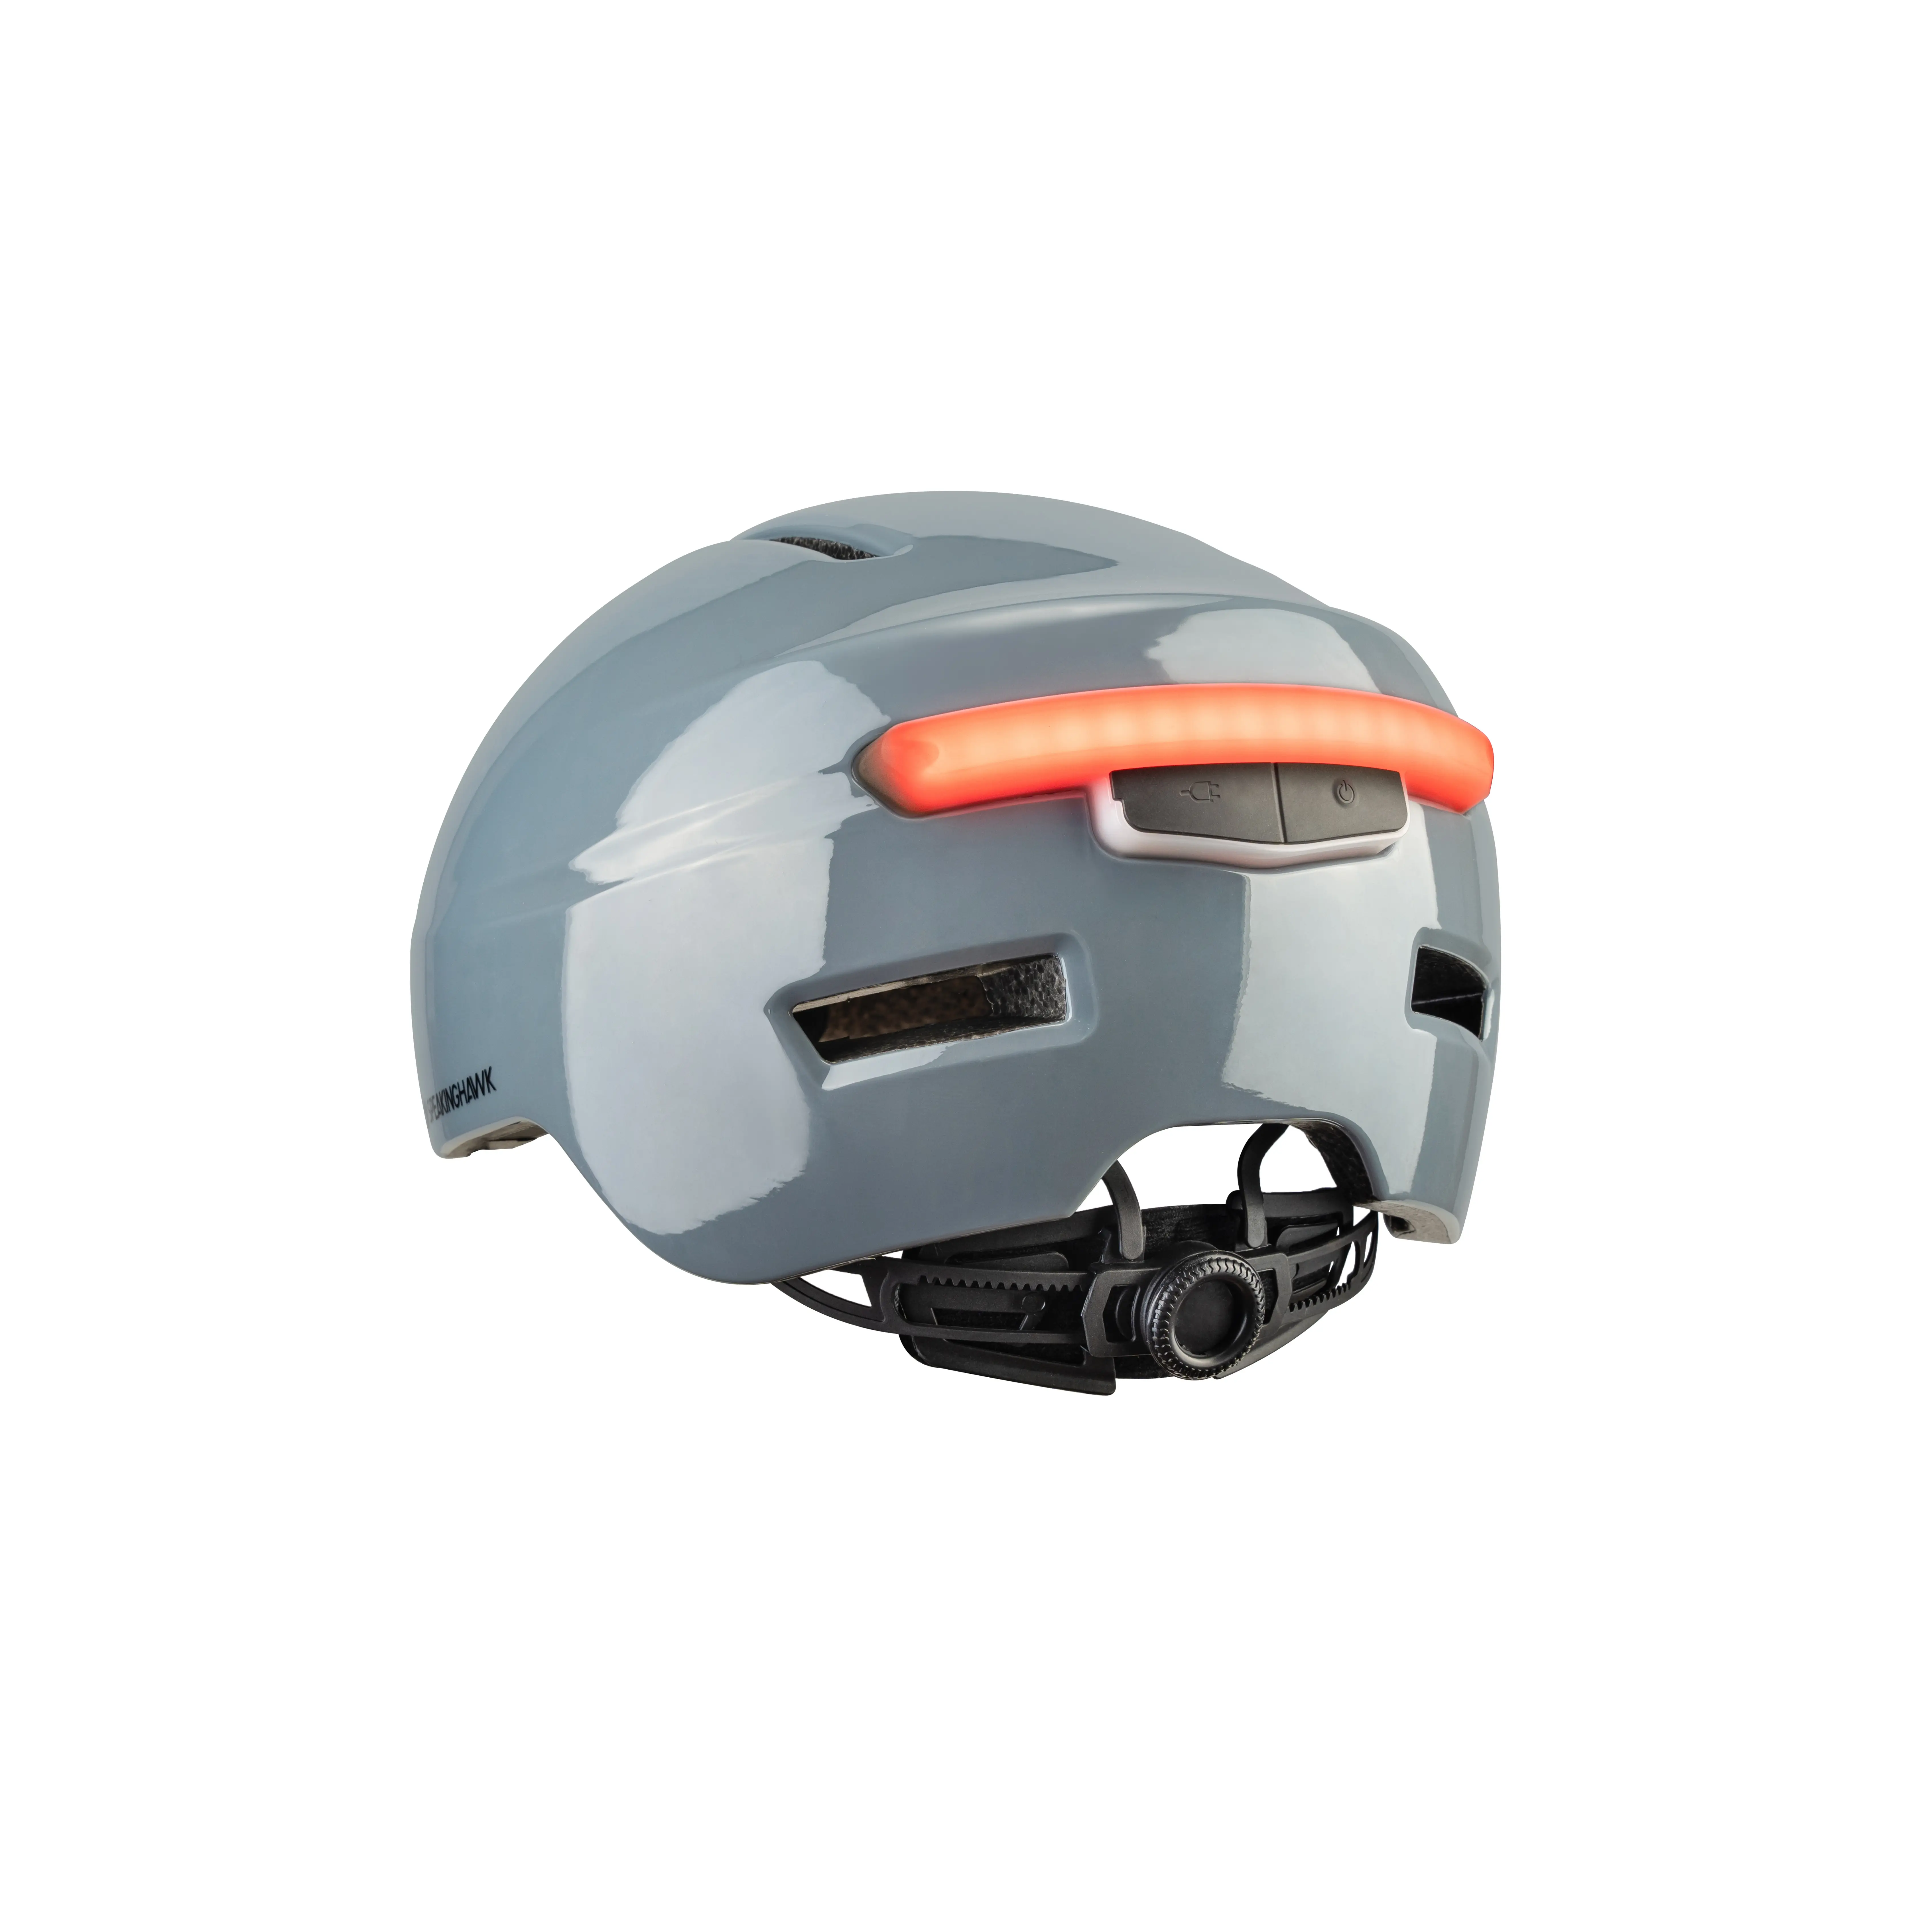 Smart Urban Helmet for leisure with voice control, LED and Blue tooth